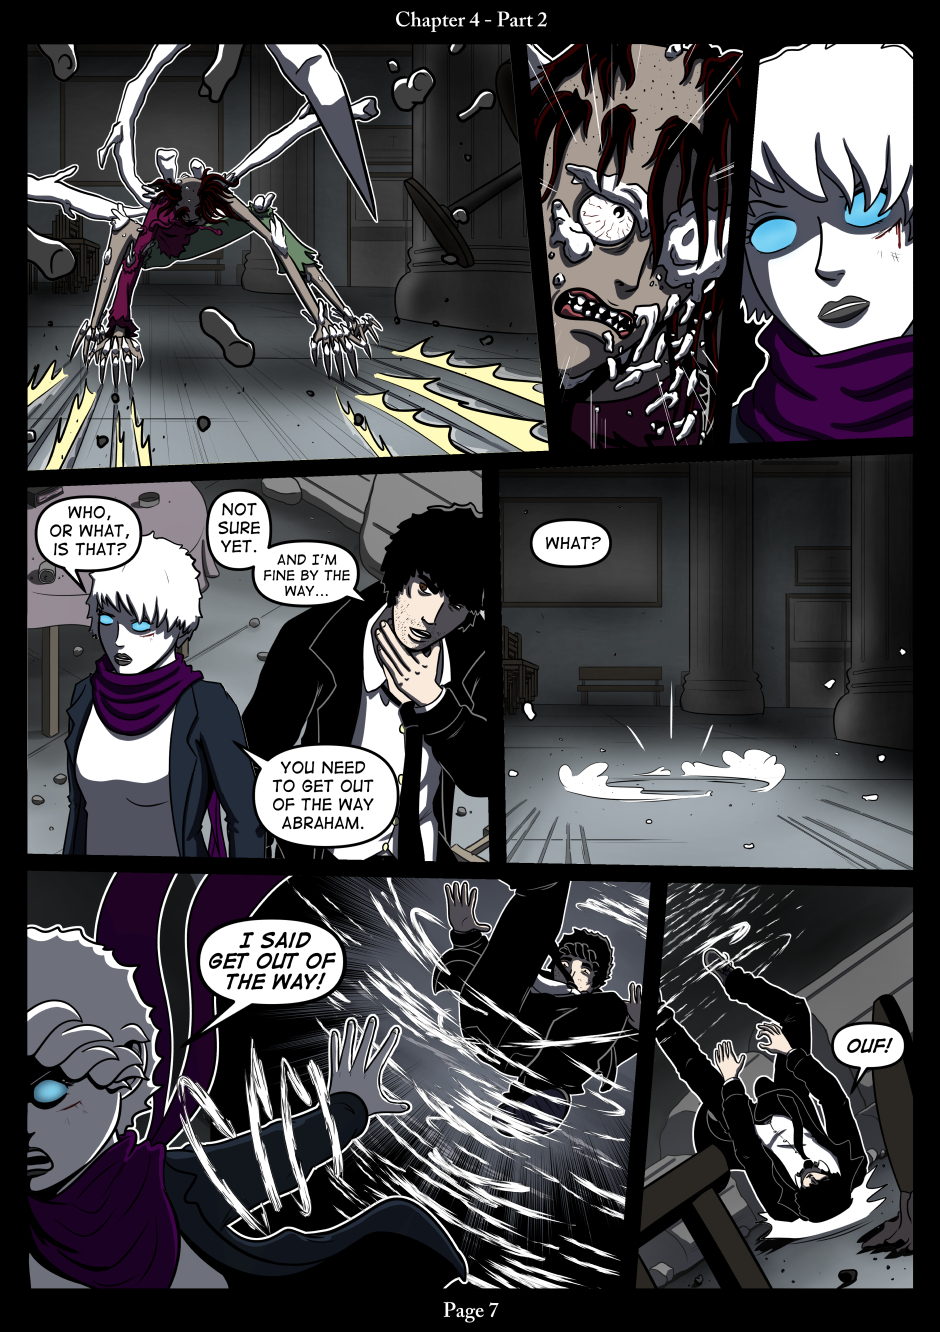 Chapter 4 - Part 2, Page 7